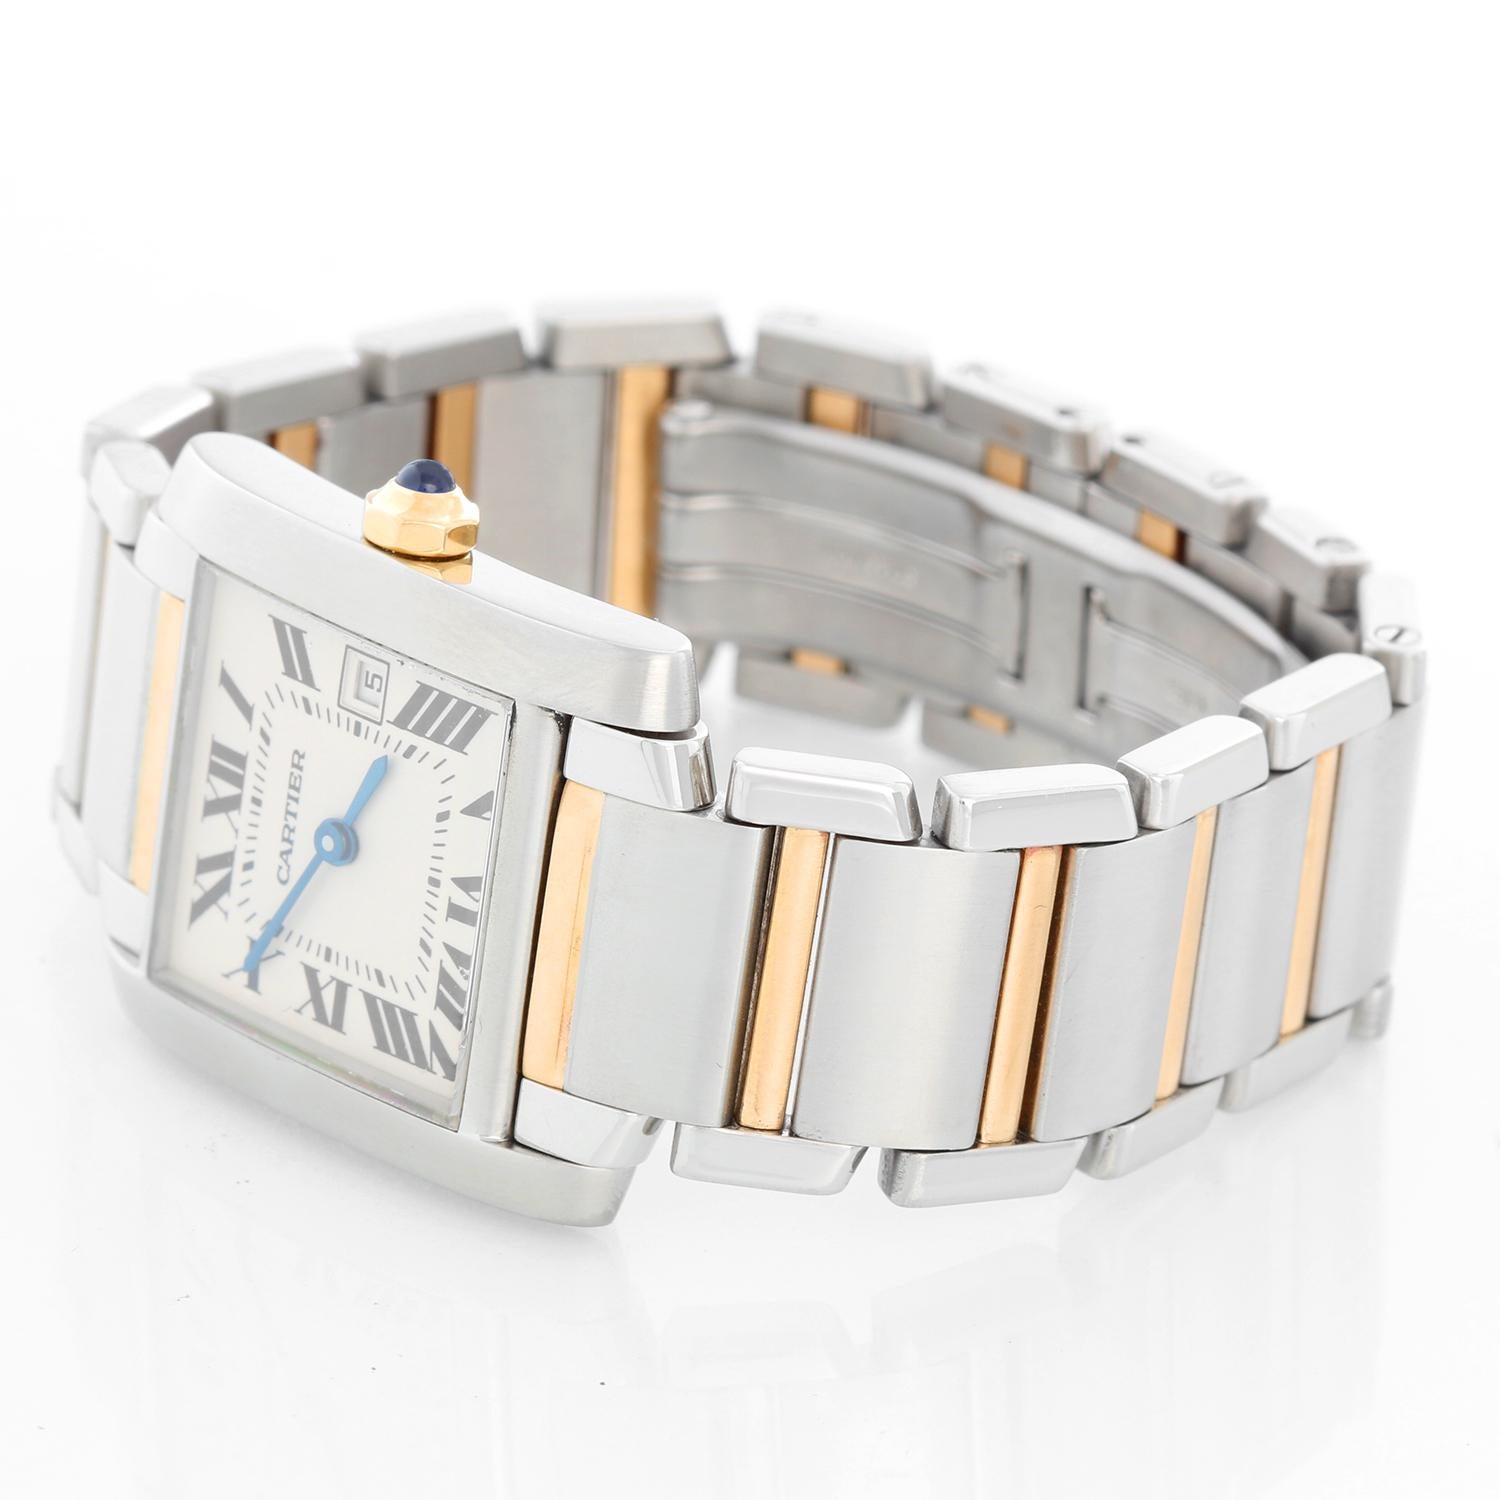 Cartier Tank Francaise Midsize 2-Tone Watch W51005Q4 2465 - Quartz. Stainless steel case (25 x 30 mm). Silver guilloche dial with black Roman numerals; date at 3 o'clock. Stainless steel and 18k yellow gold Cartier bracelet with deployant buckle.